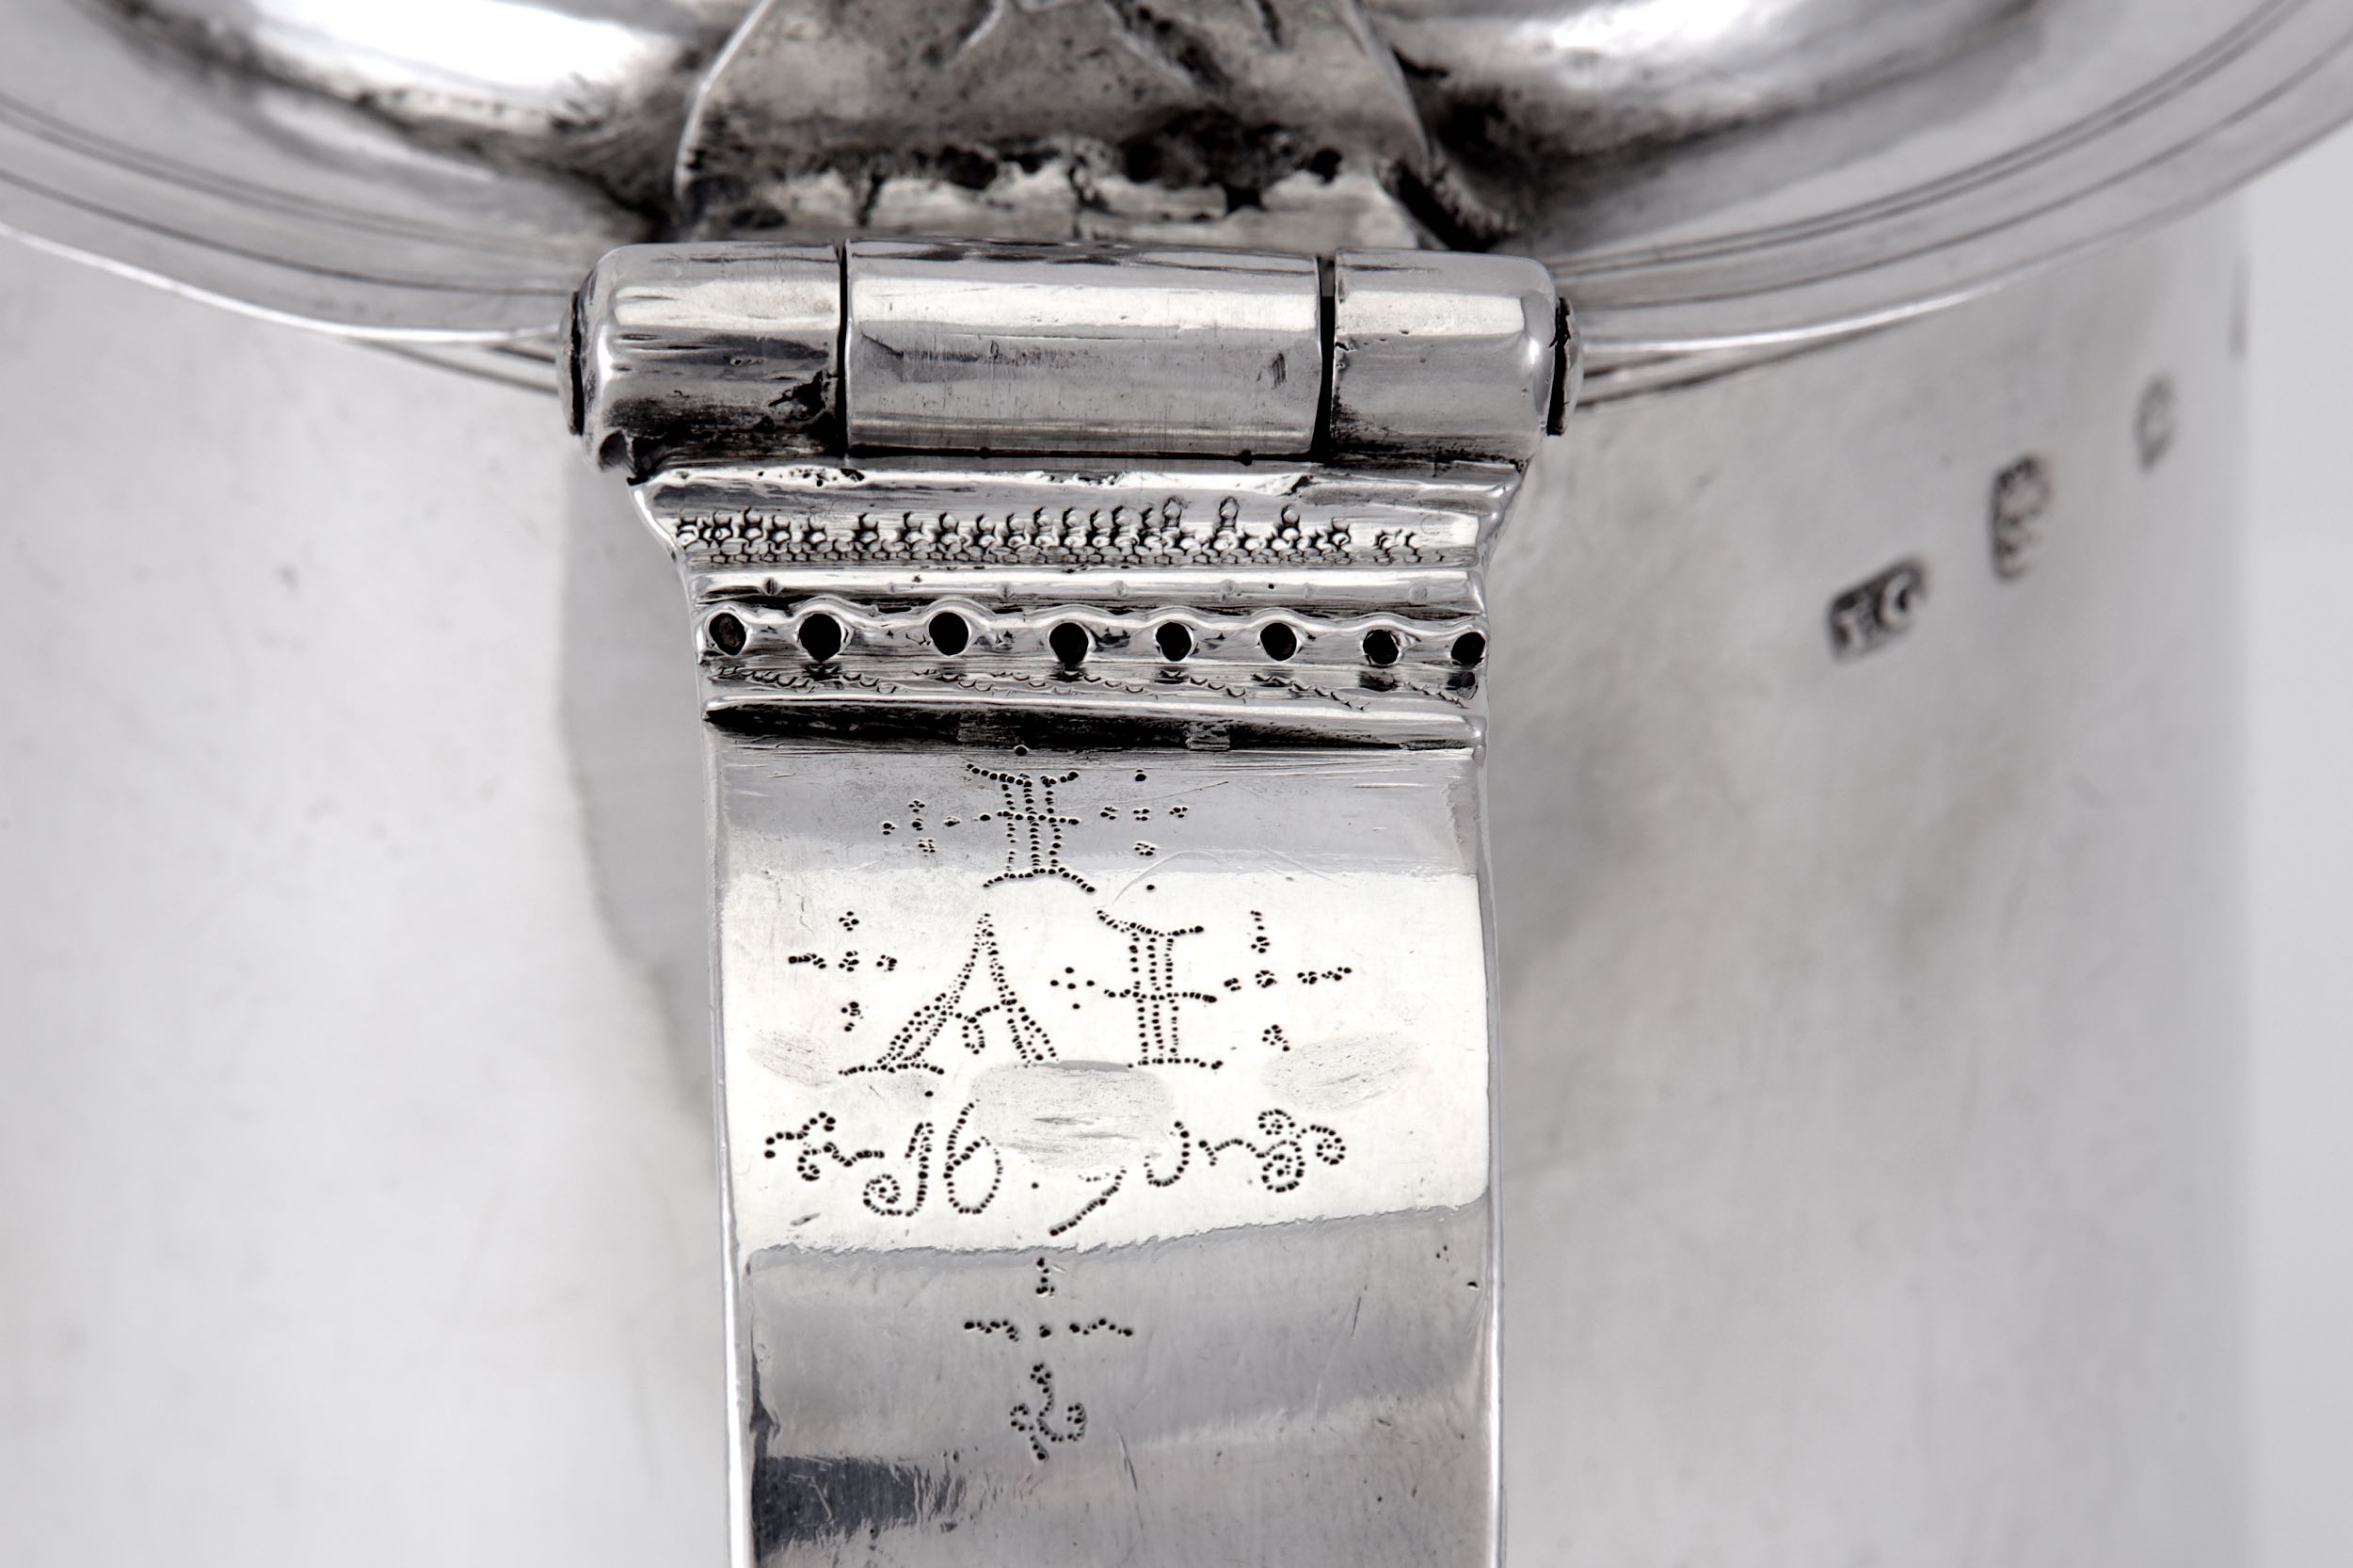 A Charles II sterling silver tankard, London 1676 by E G in a rectangle, attributed to Edward Gladwi - Image 4 of 12